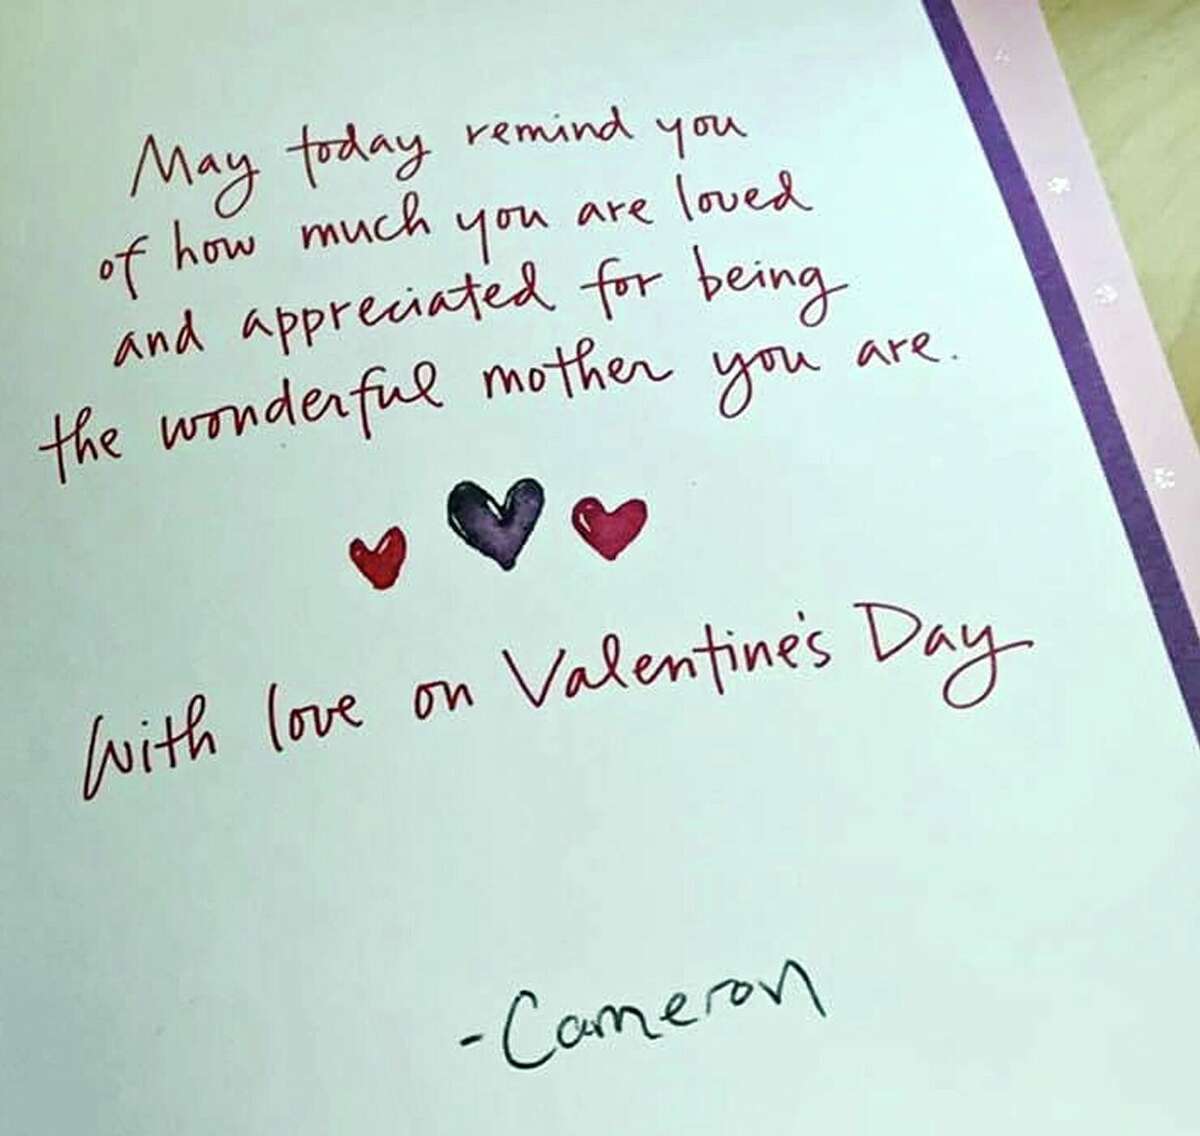 Valentine’s card that Cameron Herr presented to his mother a month before his death in 2018